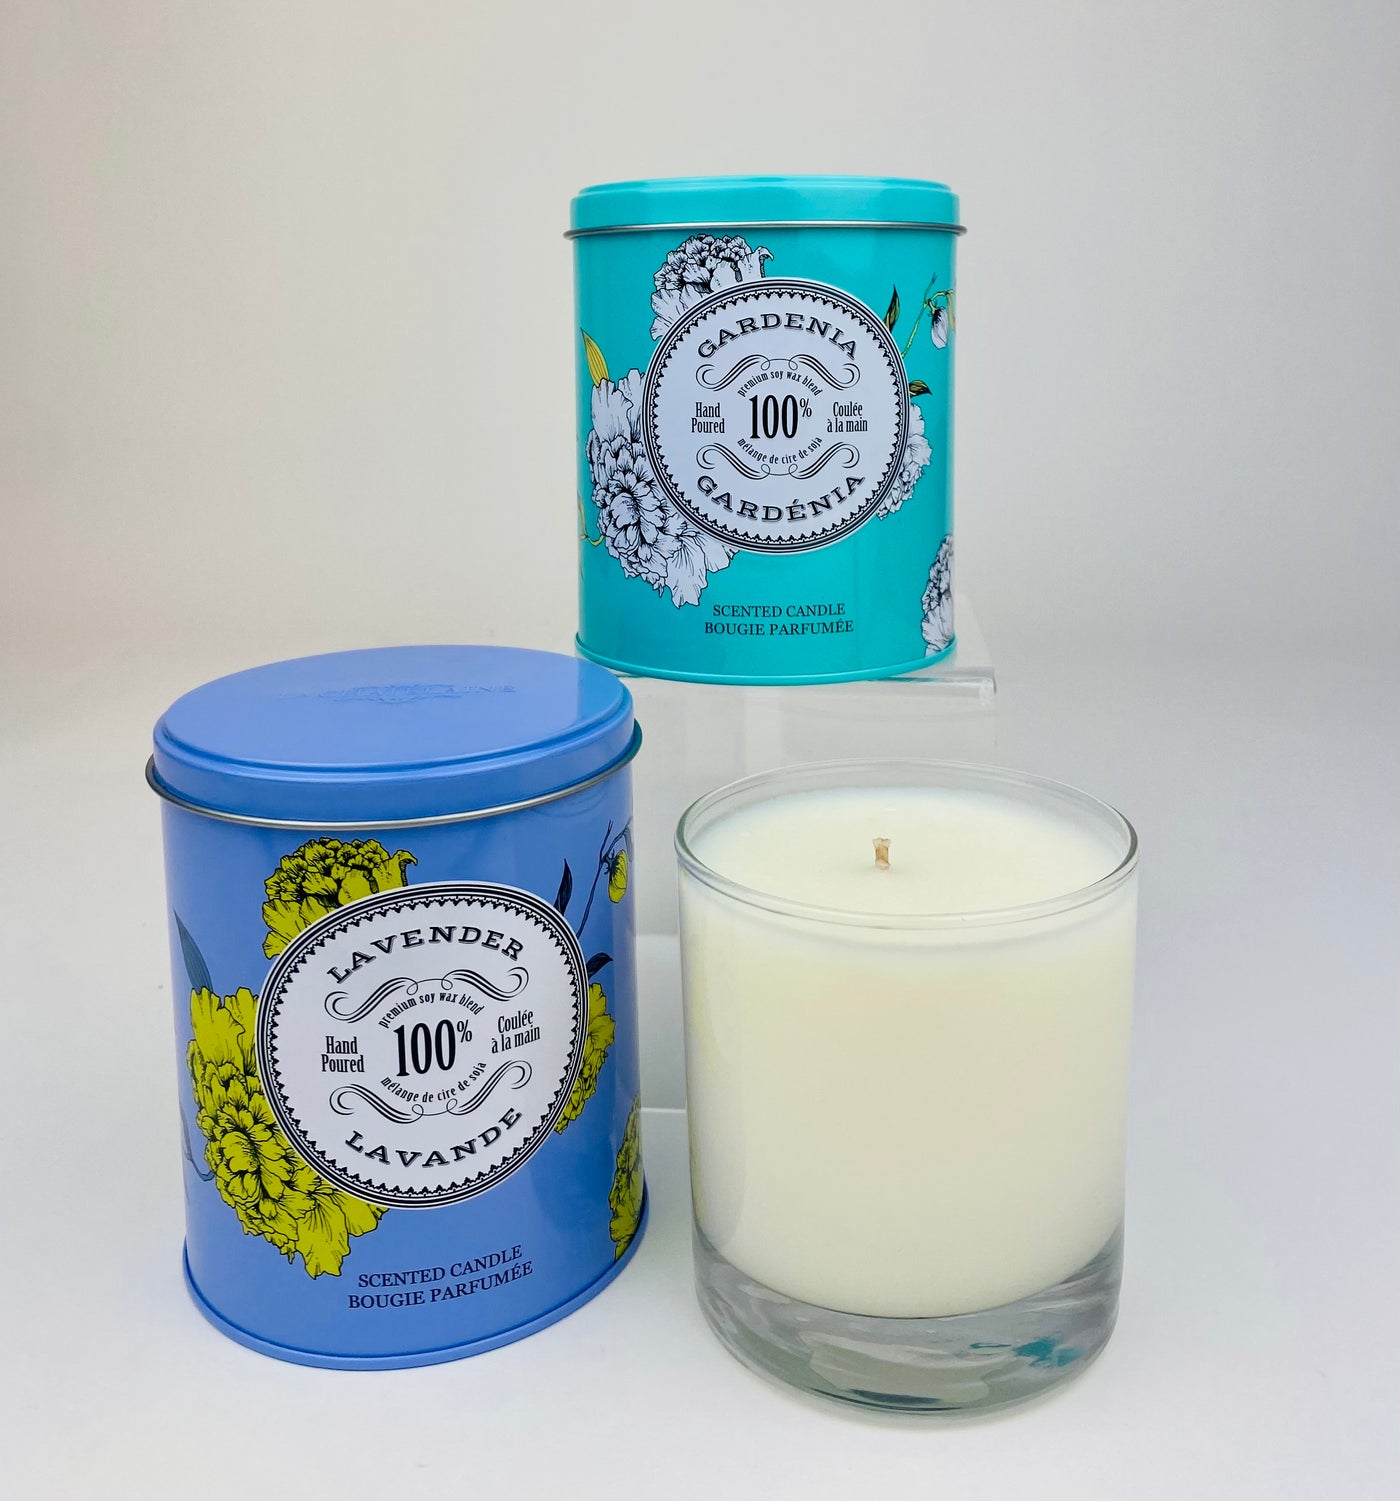 La Chatelaine Perfume Scented Candles